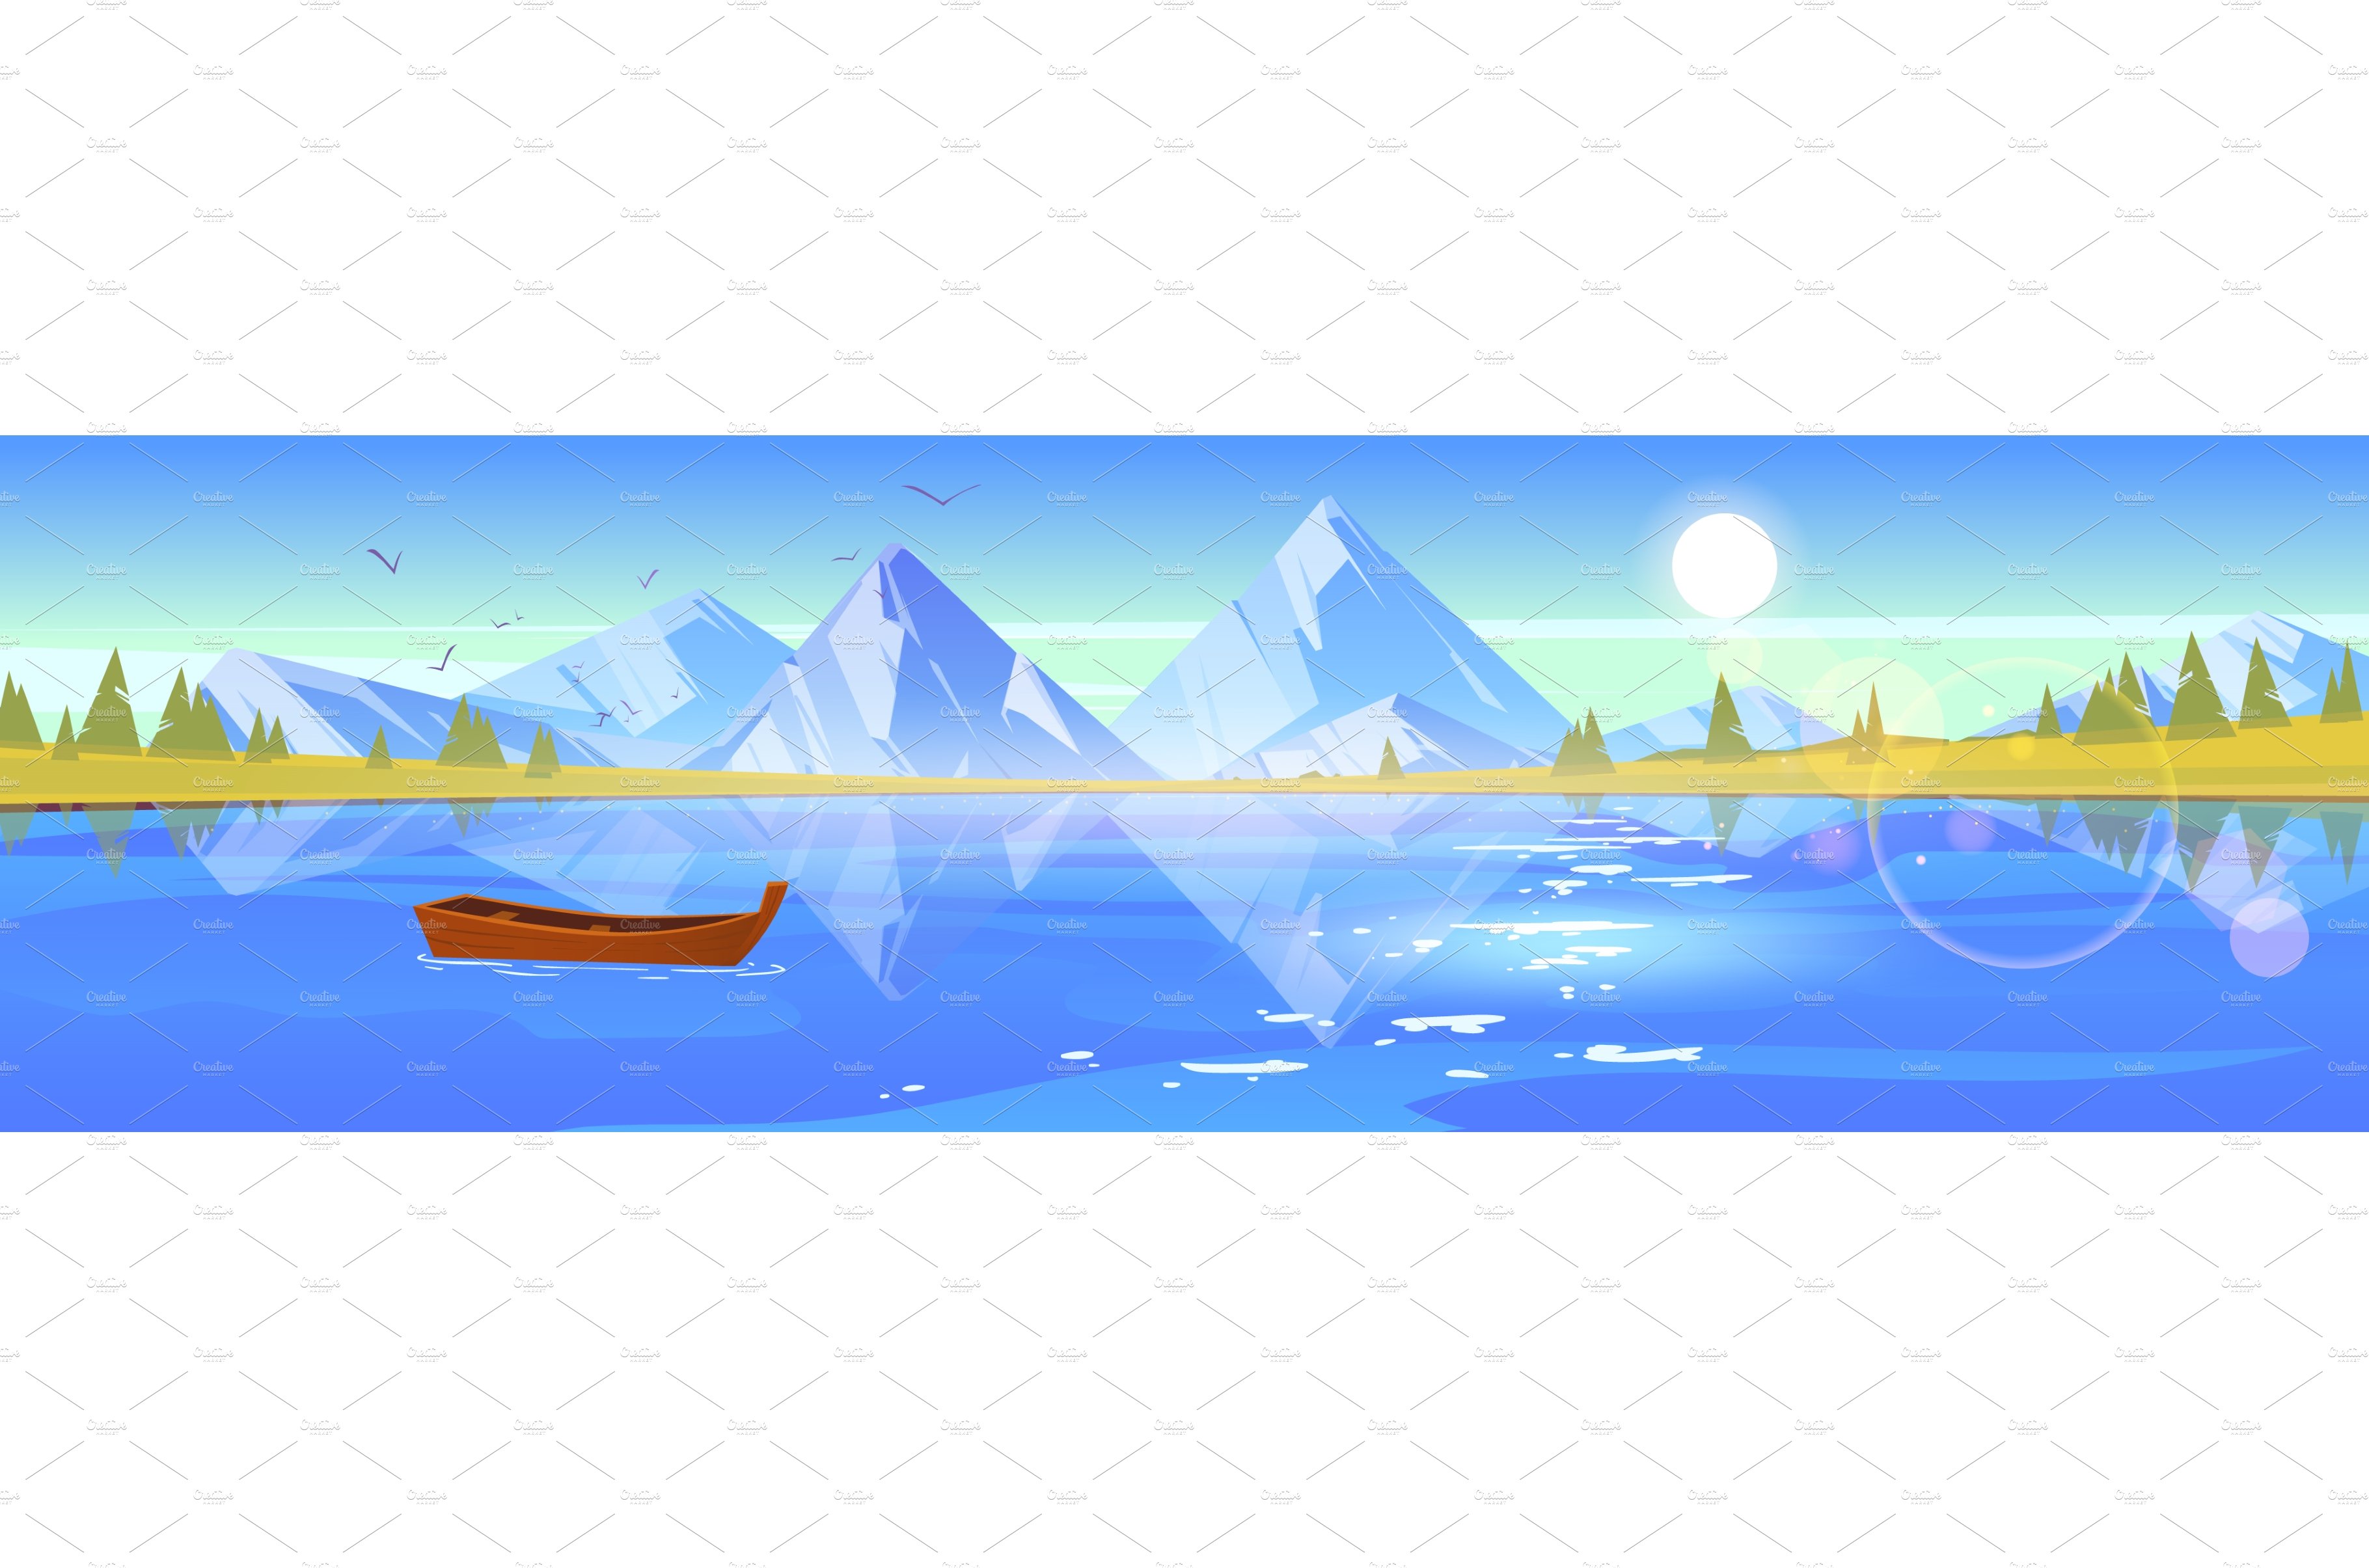 Landscape with lake with wooden boat cover image.